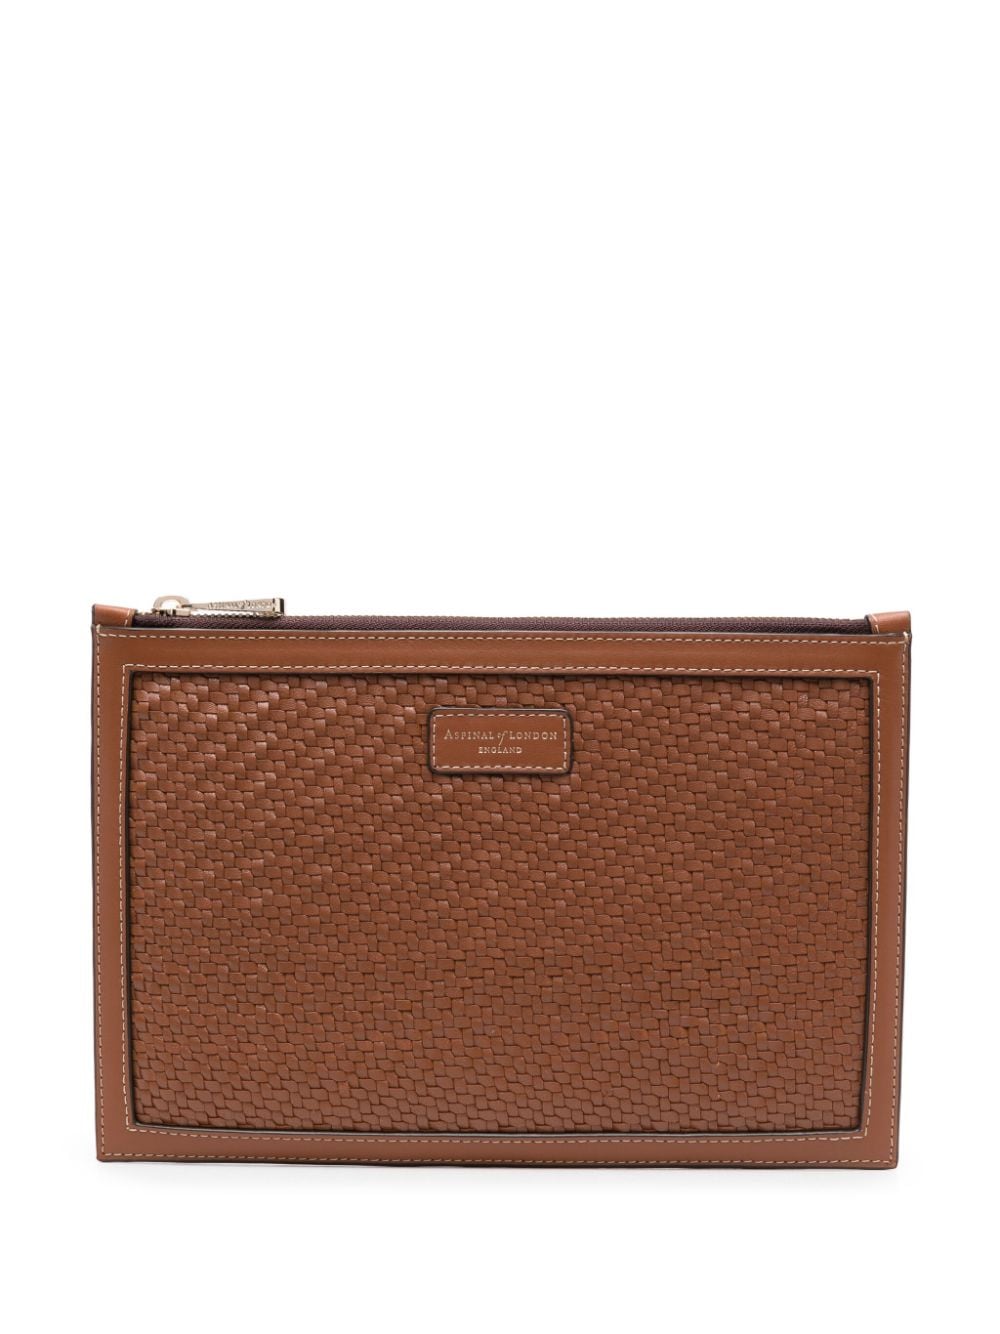 Image 1 of Aspinal Of London large Essential leather clutch bag